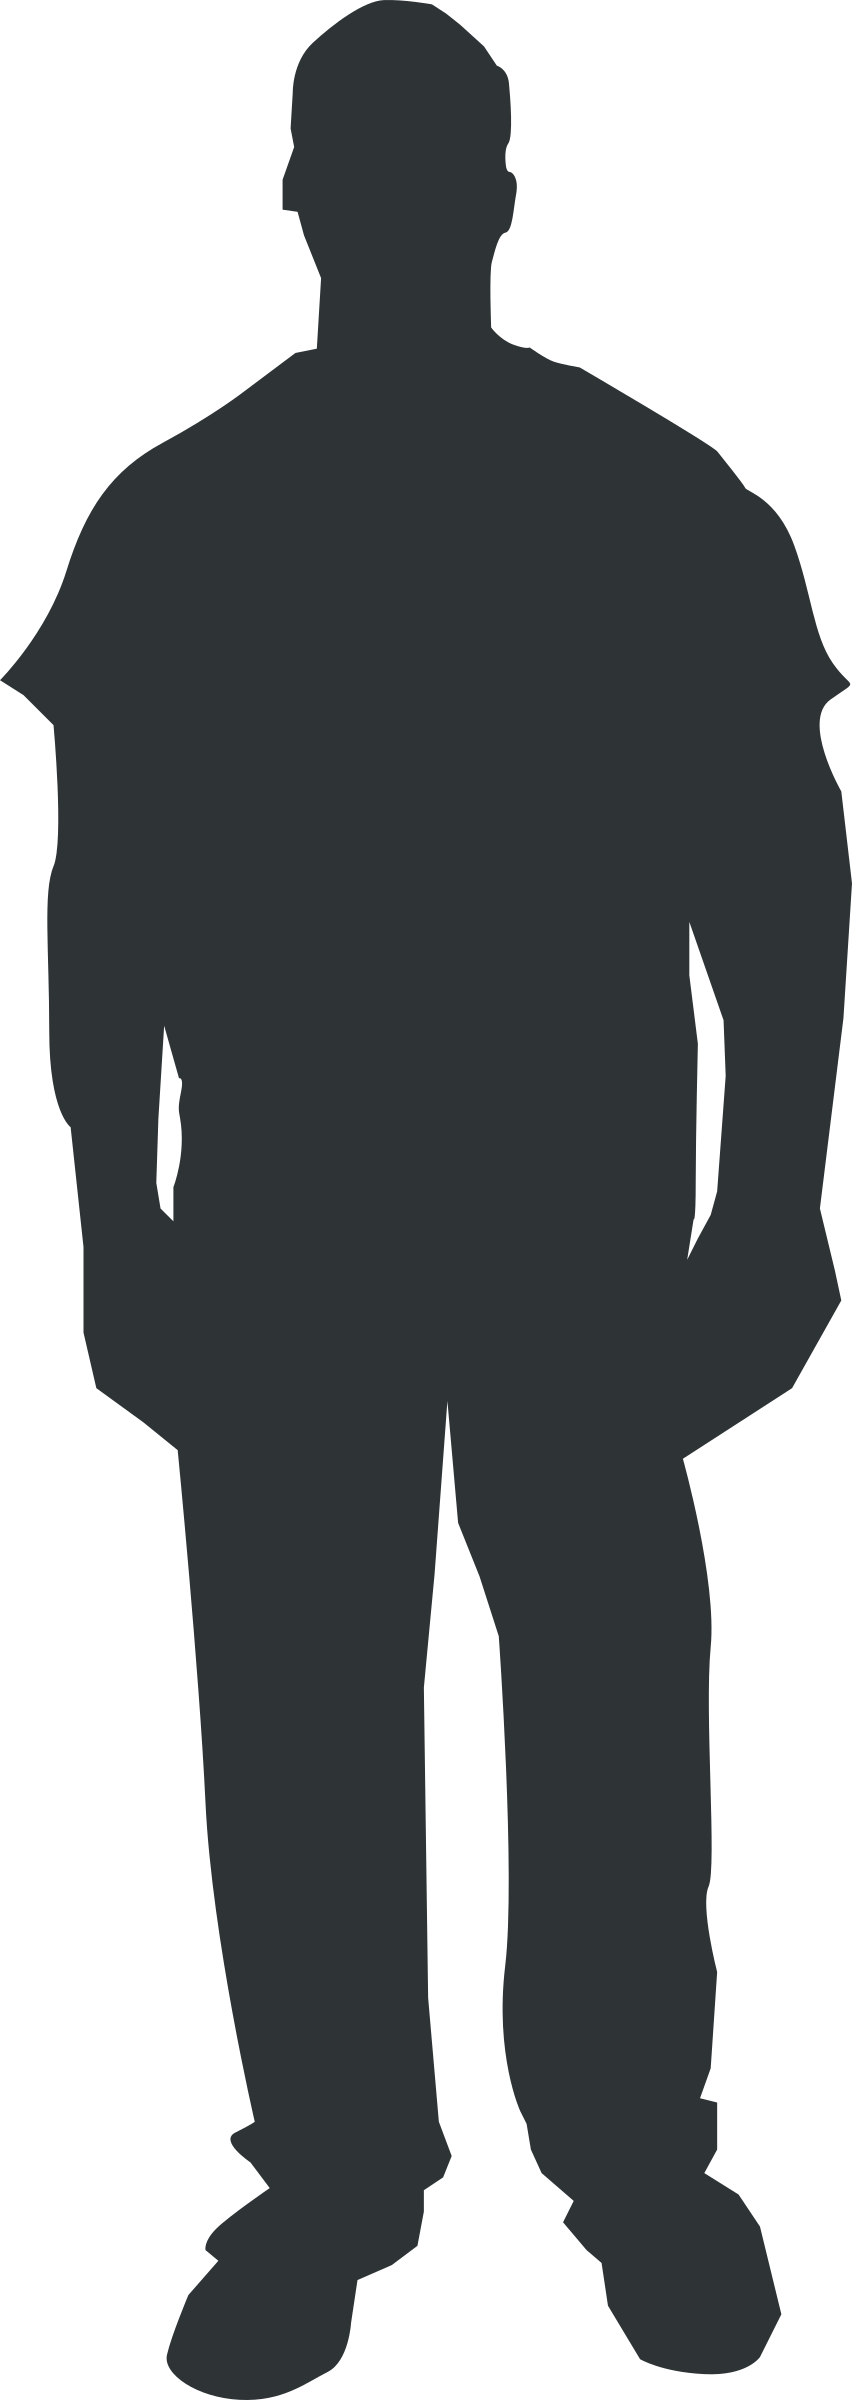 Person outline template . Humans clipart peope